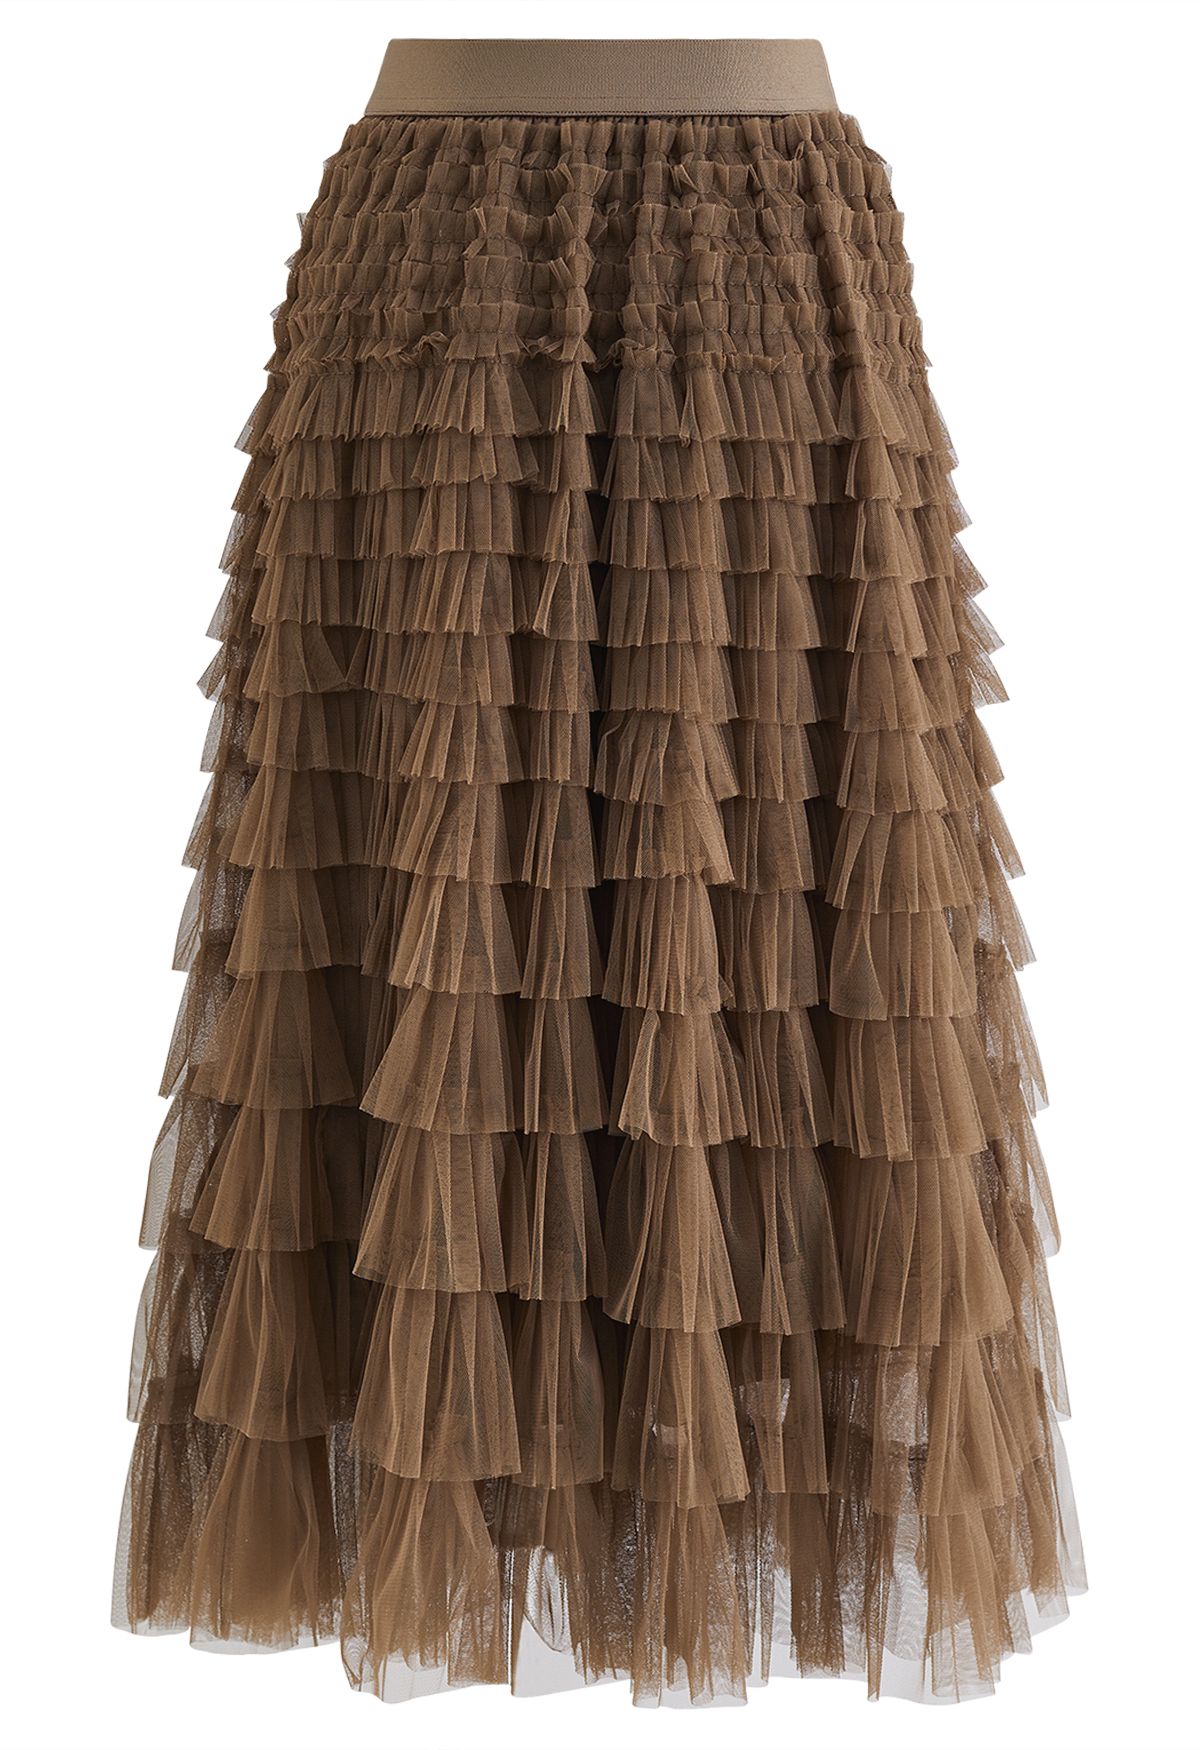 Swan Cloud Midi Skirt in Brown - Retro, Indie and Unique Fashion